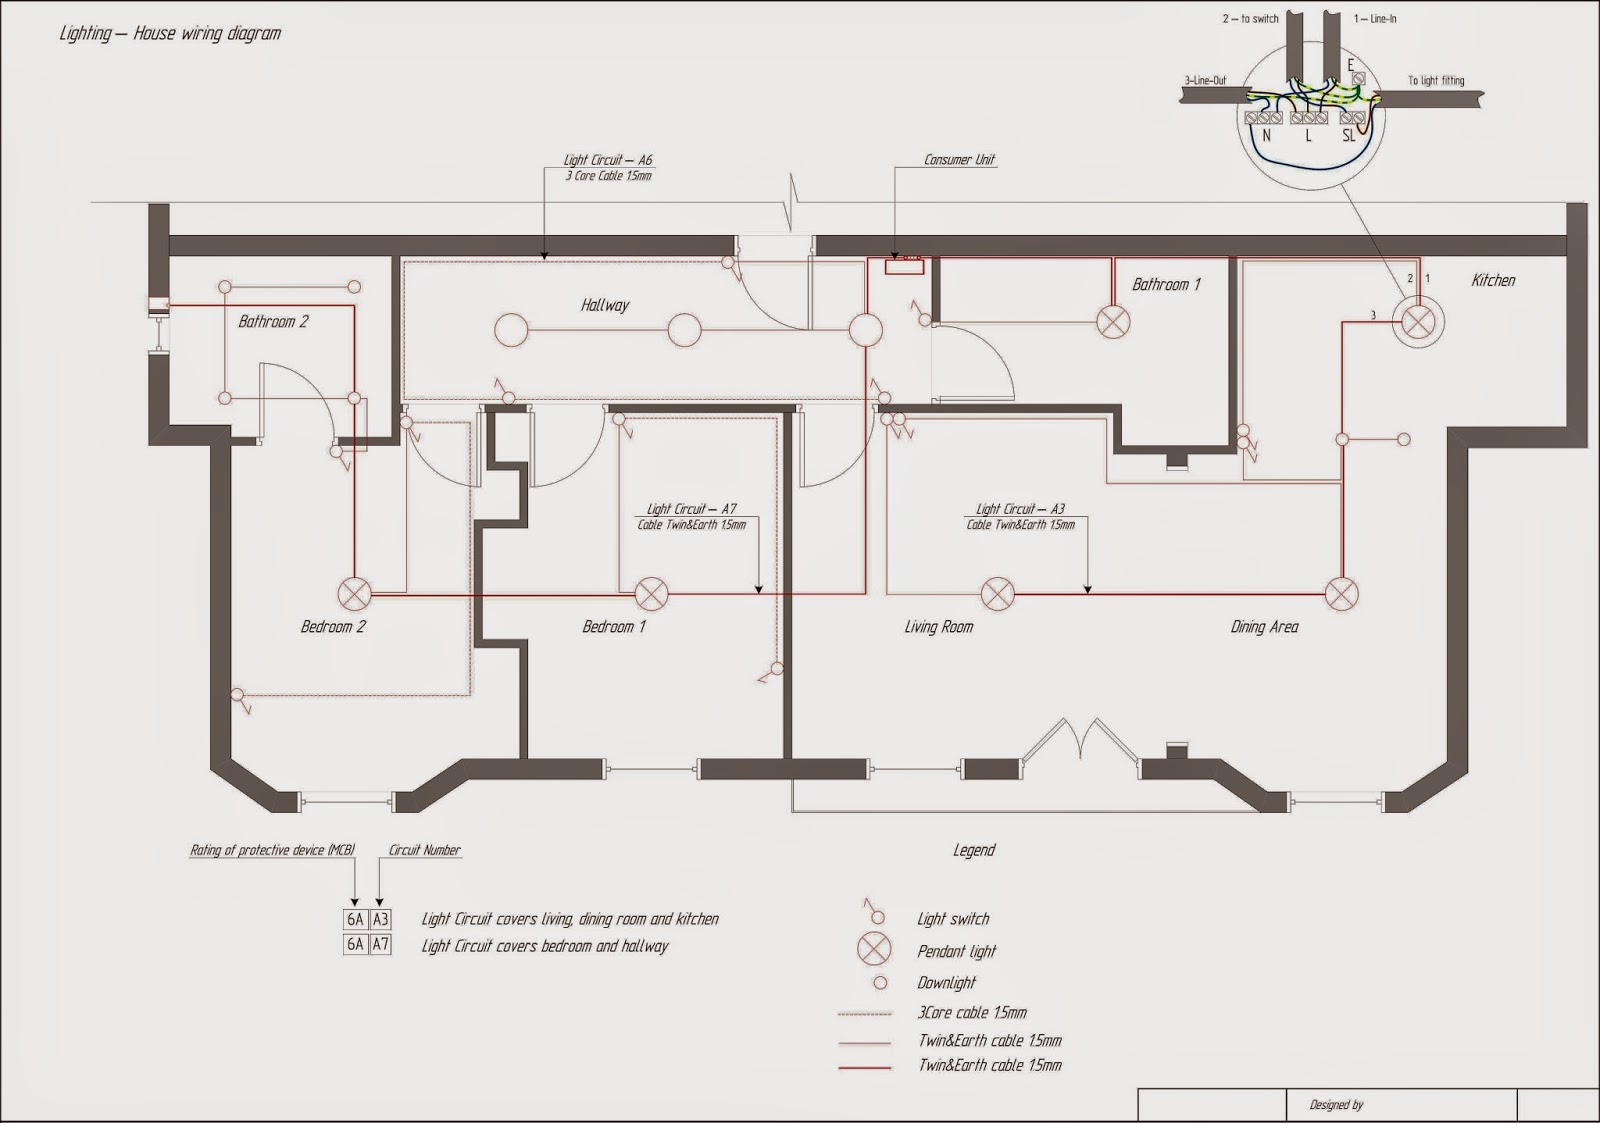 Electrical Diagram For House 1